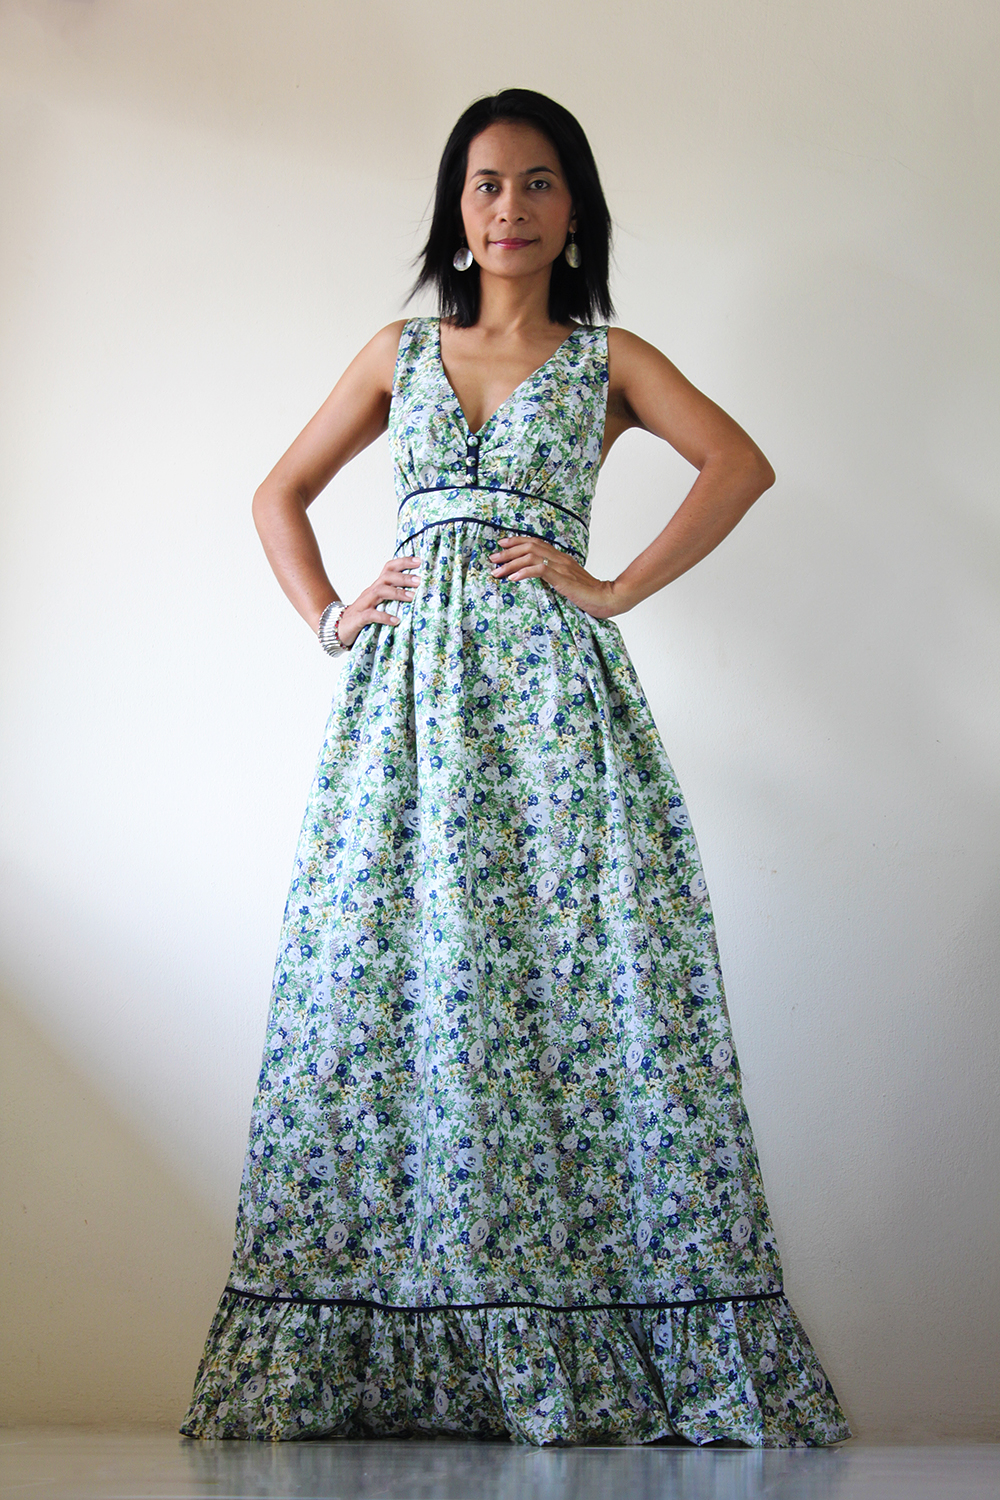 Floral Maxi Dress - Long Summer Dress : You Wear It Well Collection on